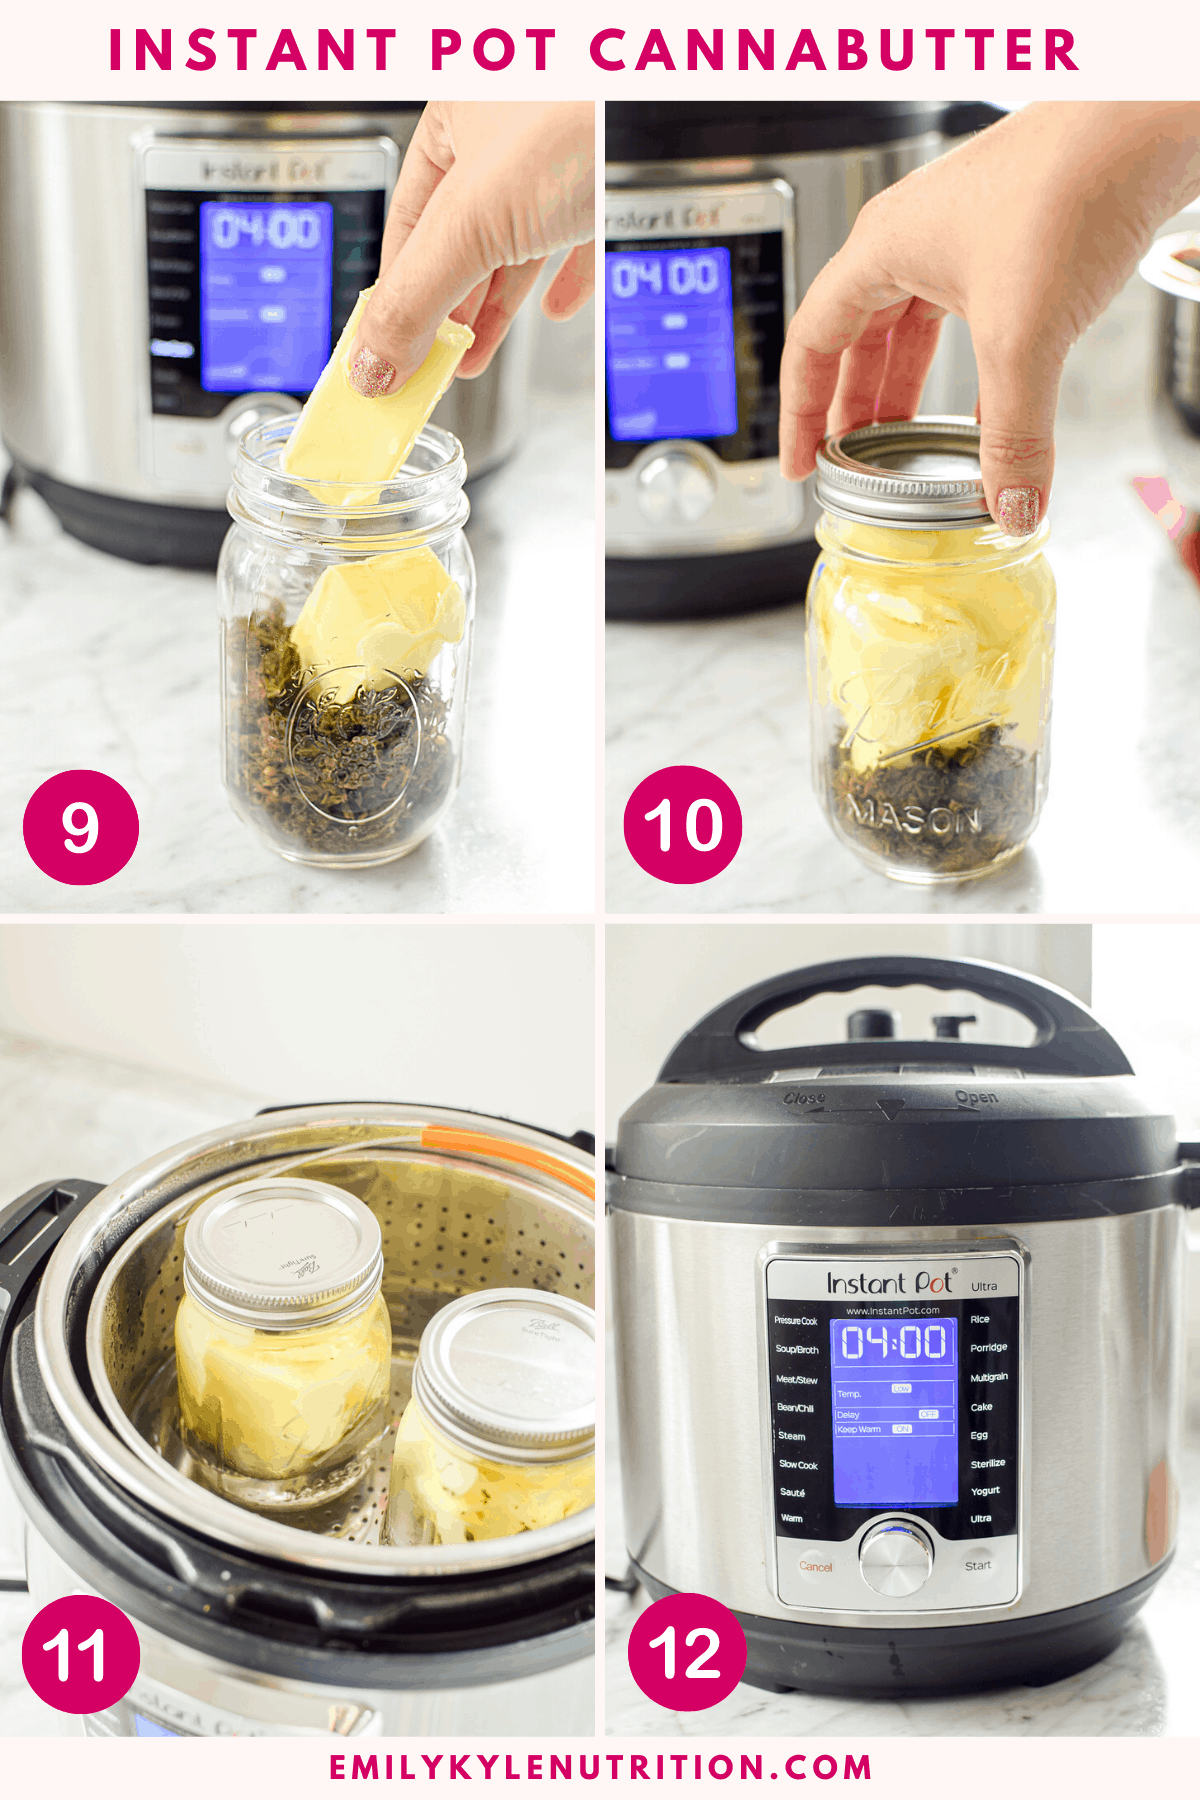 A 4 image collage showing how to set an instant pot to make cannabutter